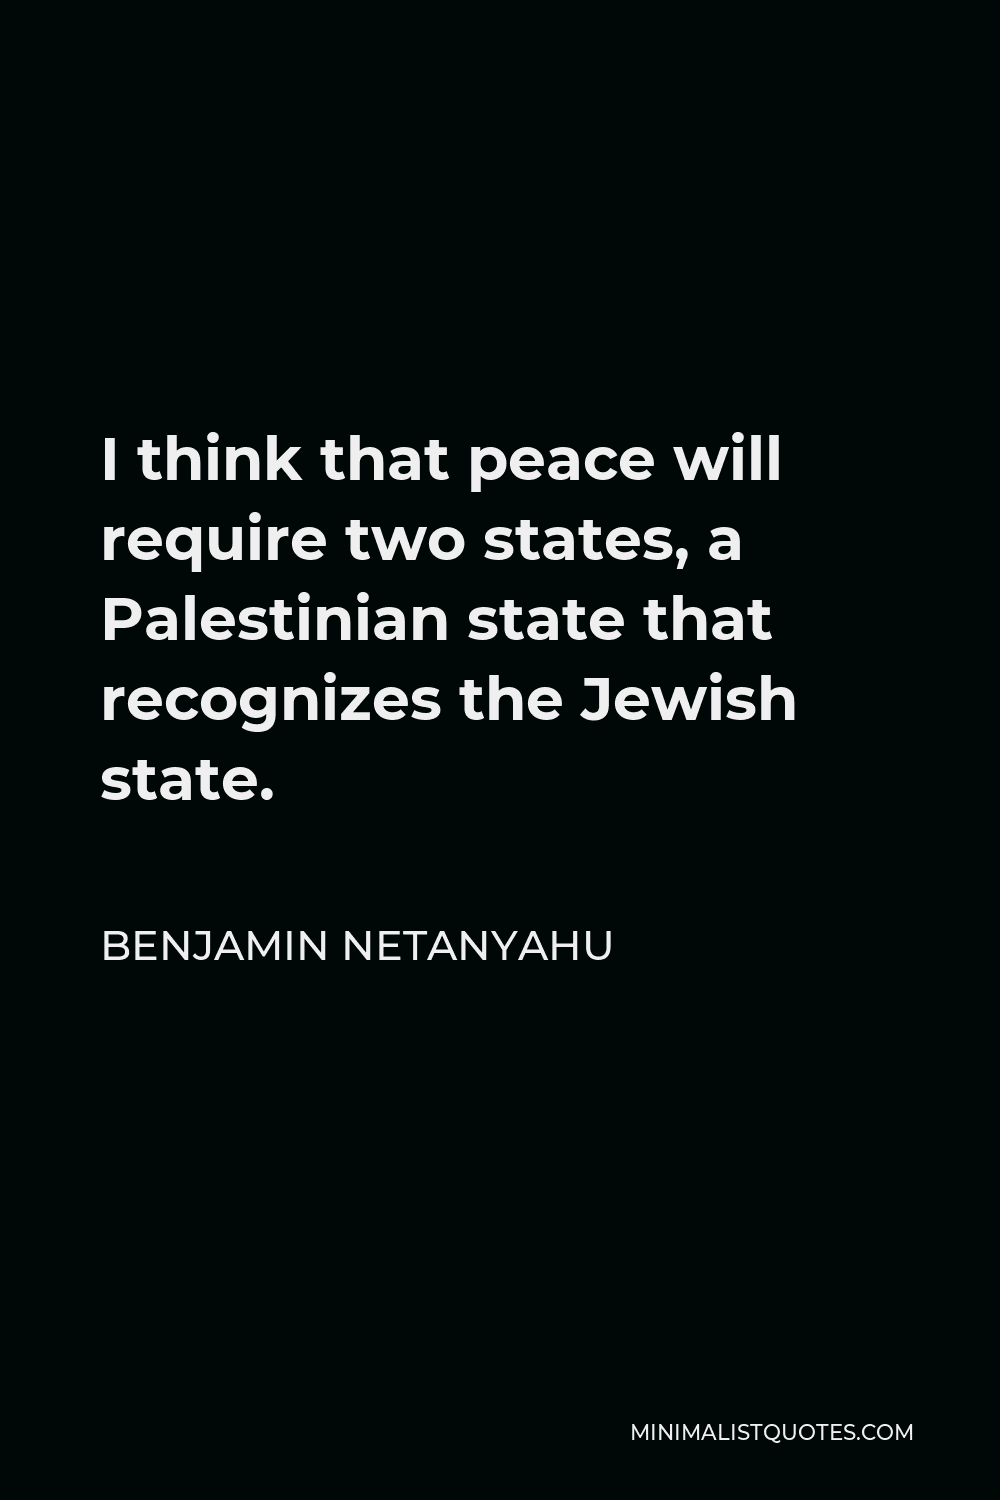 Benjamin Netanyahu Quote - I think that peace will require two states, a Palestinian state that recognizes the Jewish state.